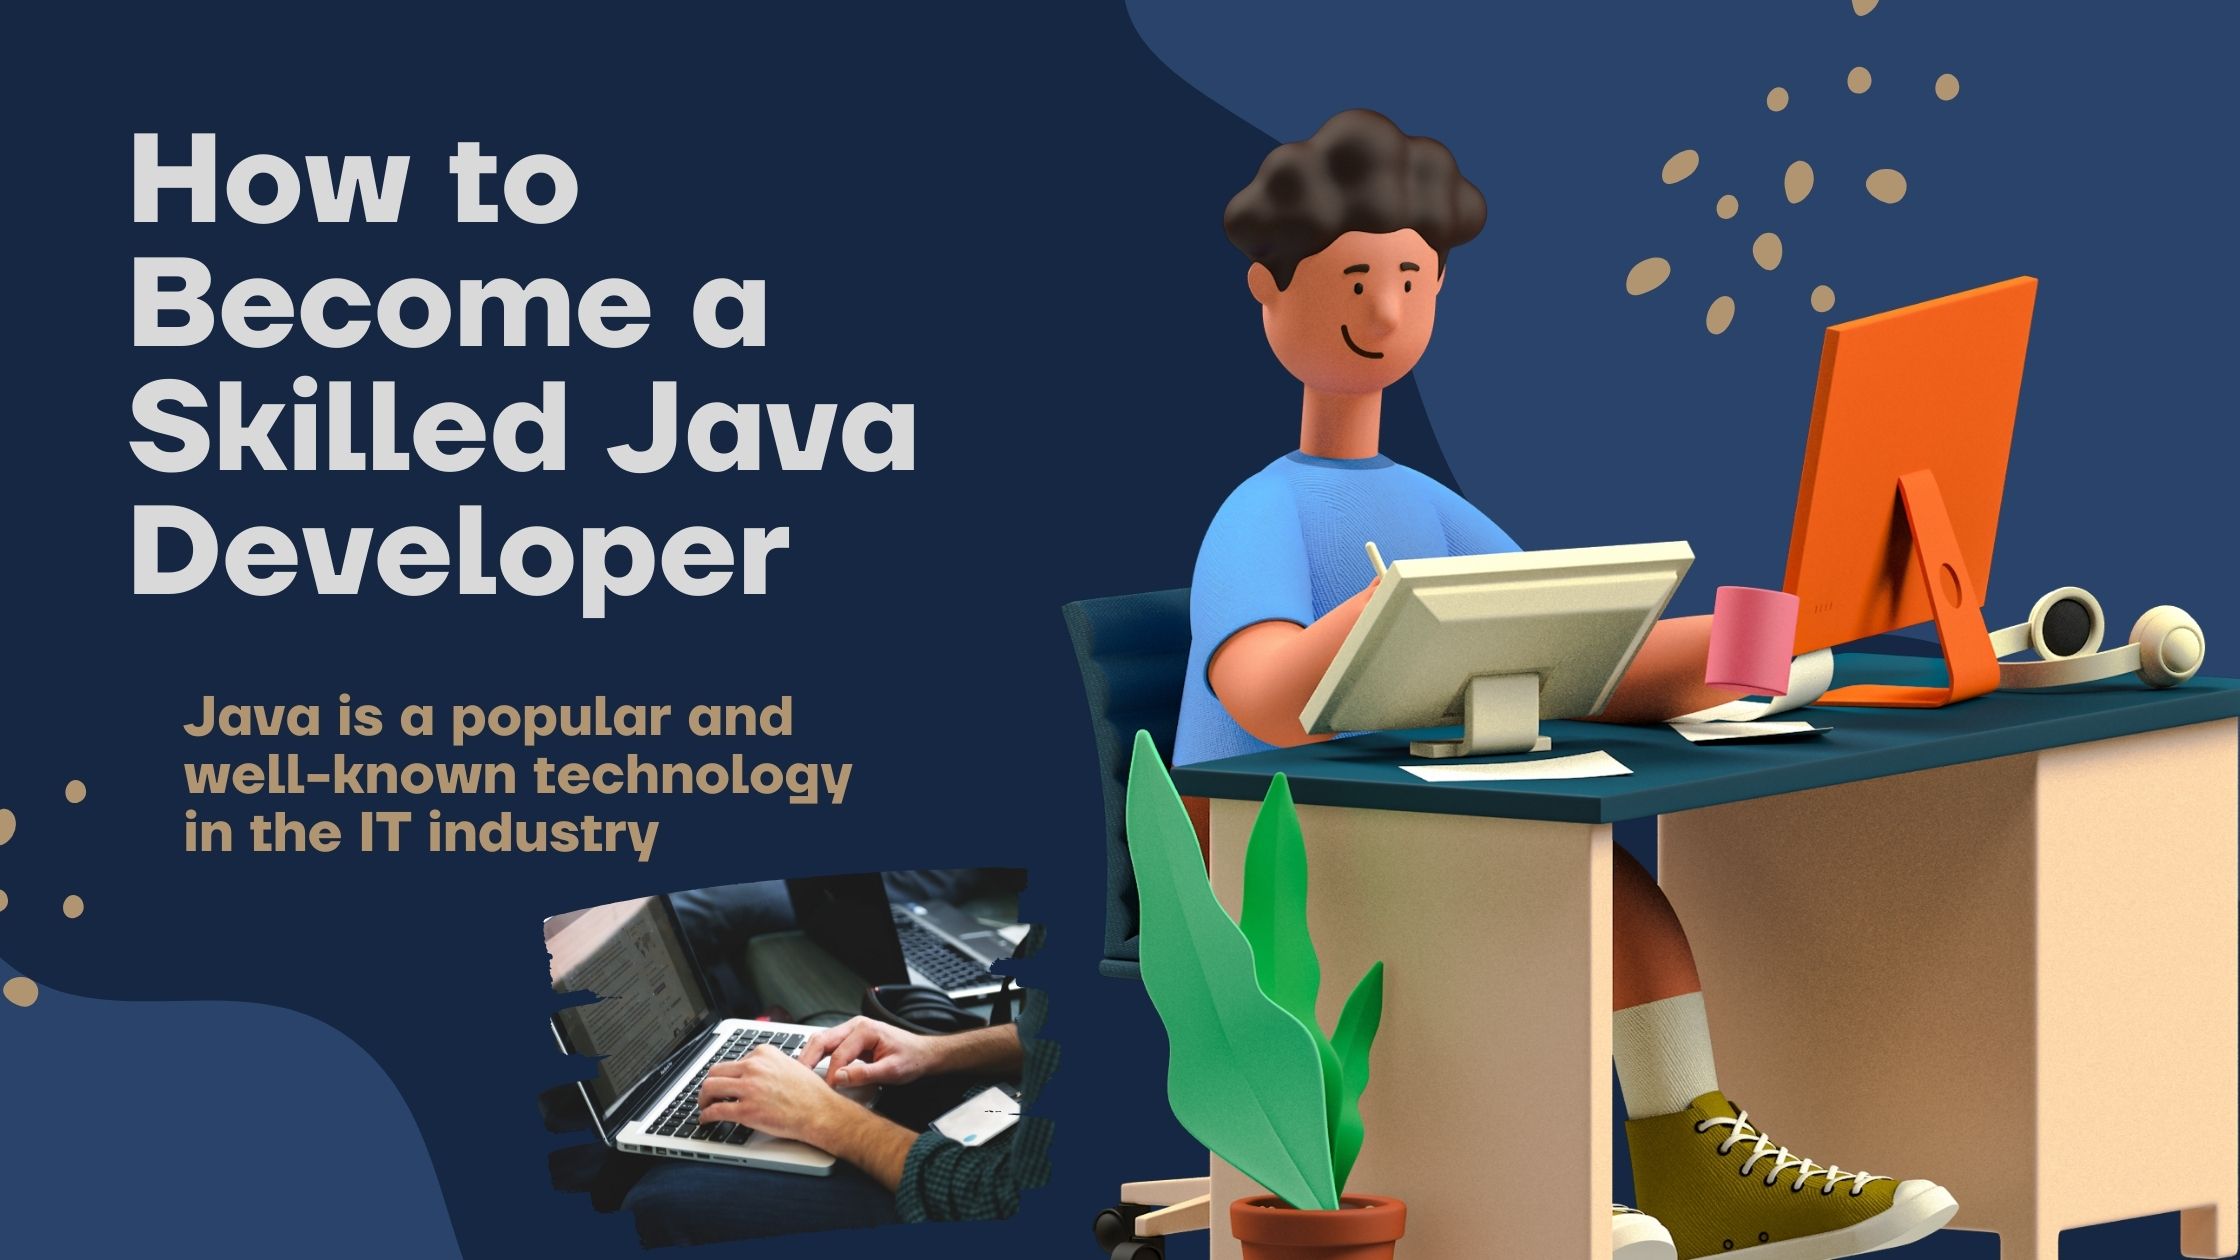 How to Become a Skilled Java Developer